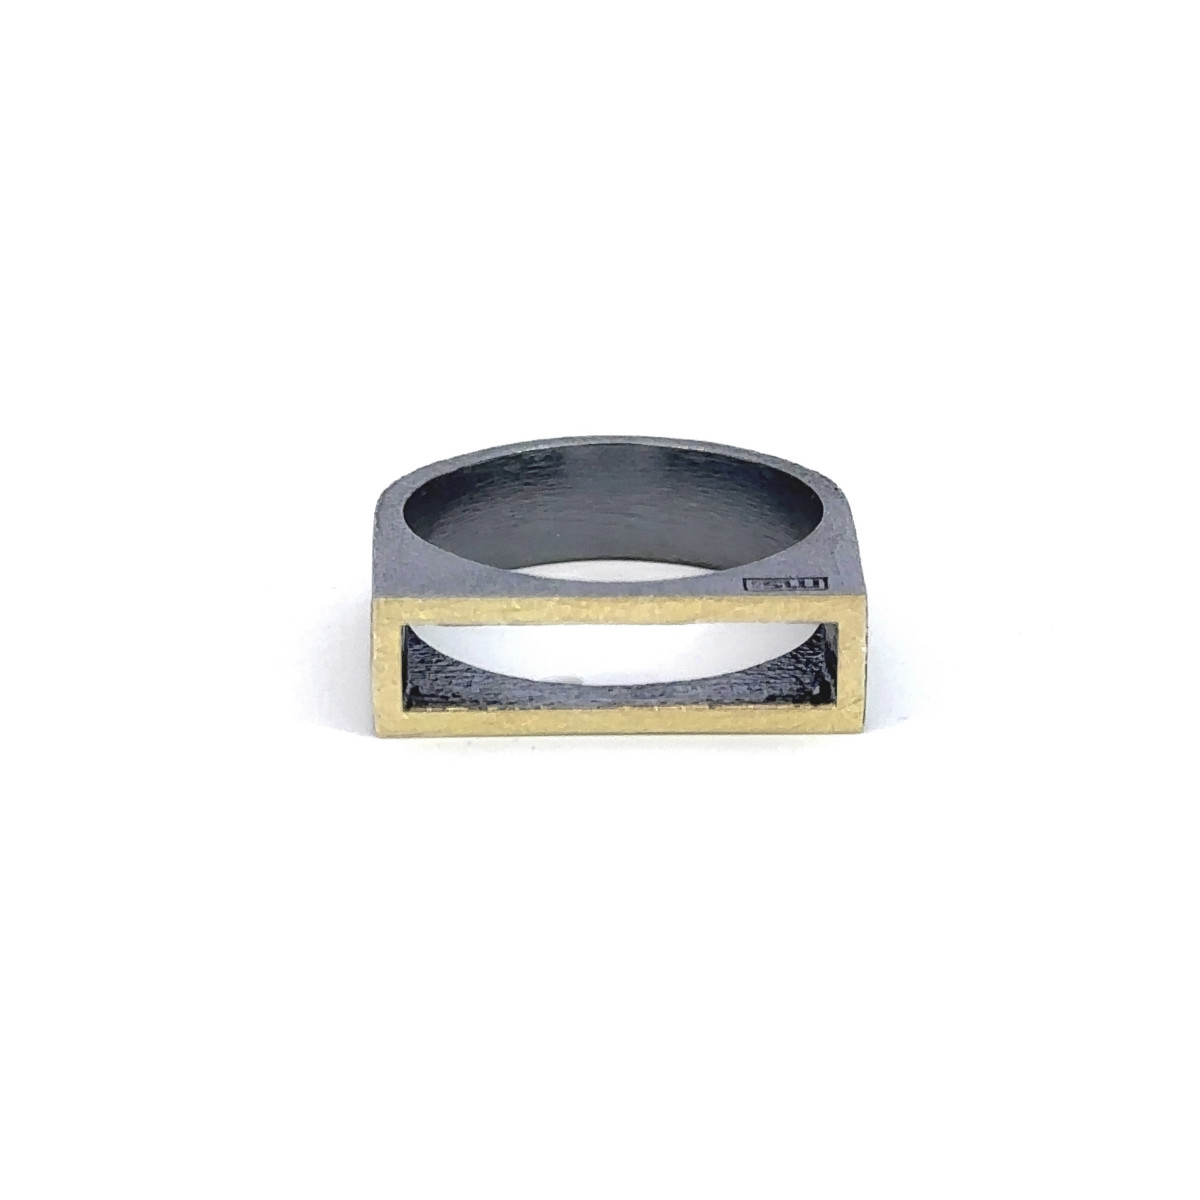 Black silver and gold ring